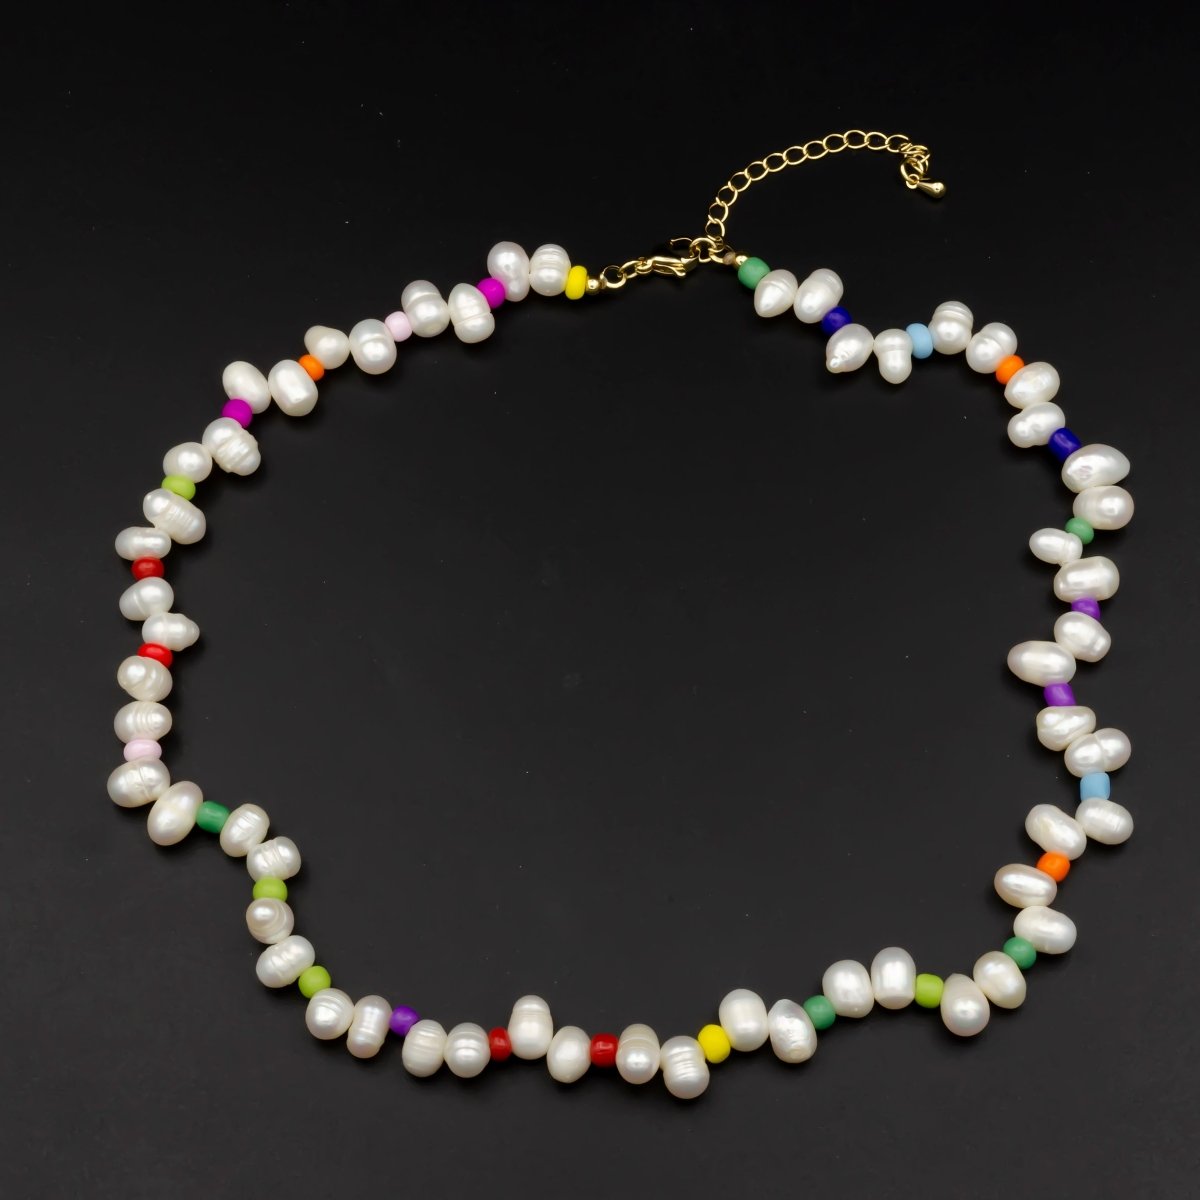 8mm Double Natural Oval Ringed Freshwater Pearl Multicolor Rainbow Bead 16 Inch Choker Necklace w. 2 Inch Extender | WA-305 Clearance Pricing - DLUXCA